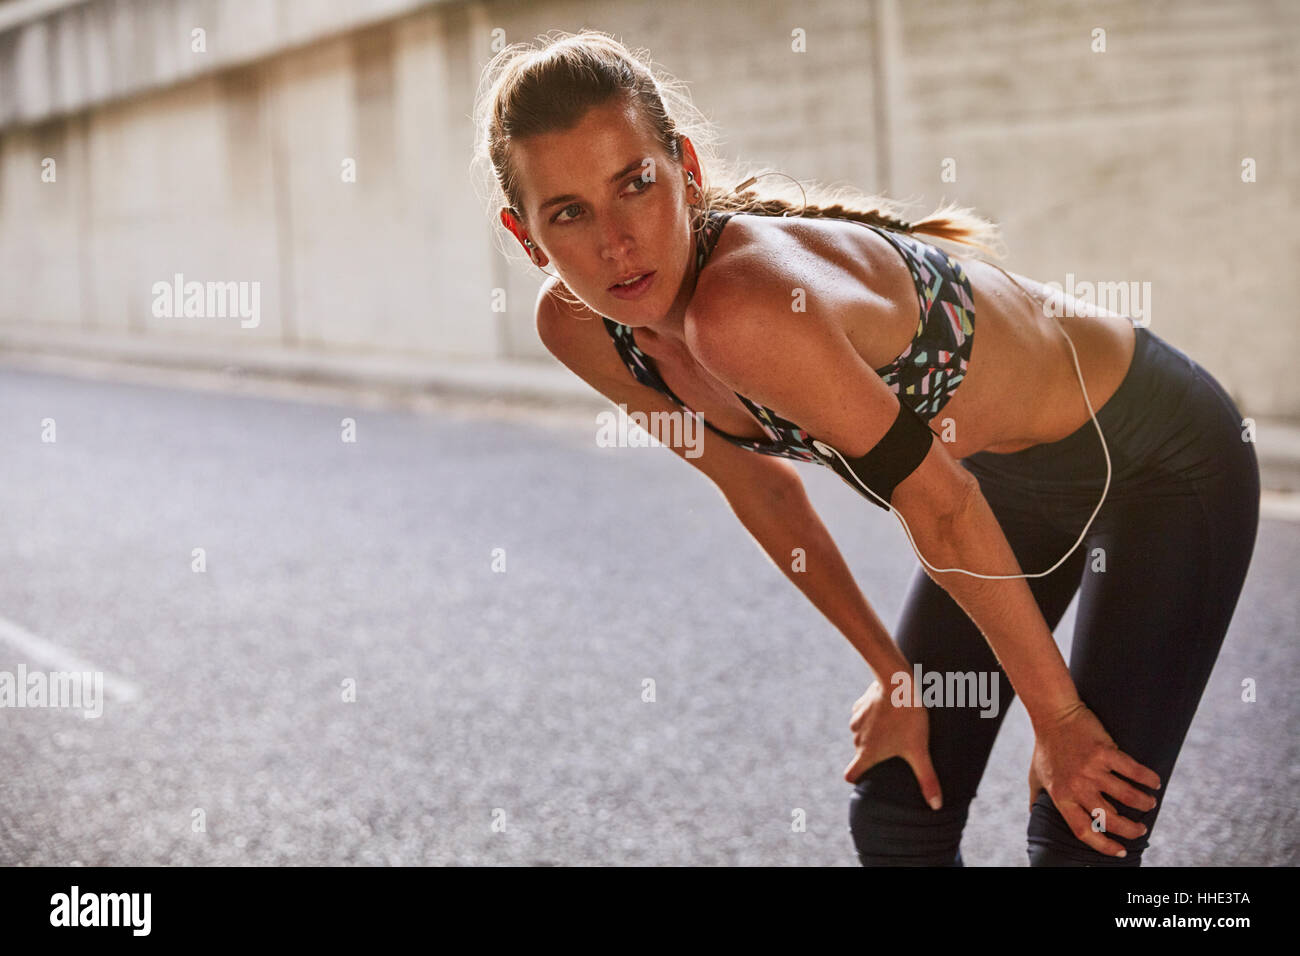 Tired fit female runner in sports bra with mp3 player armband resting on urban street Stock Photo